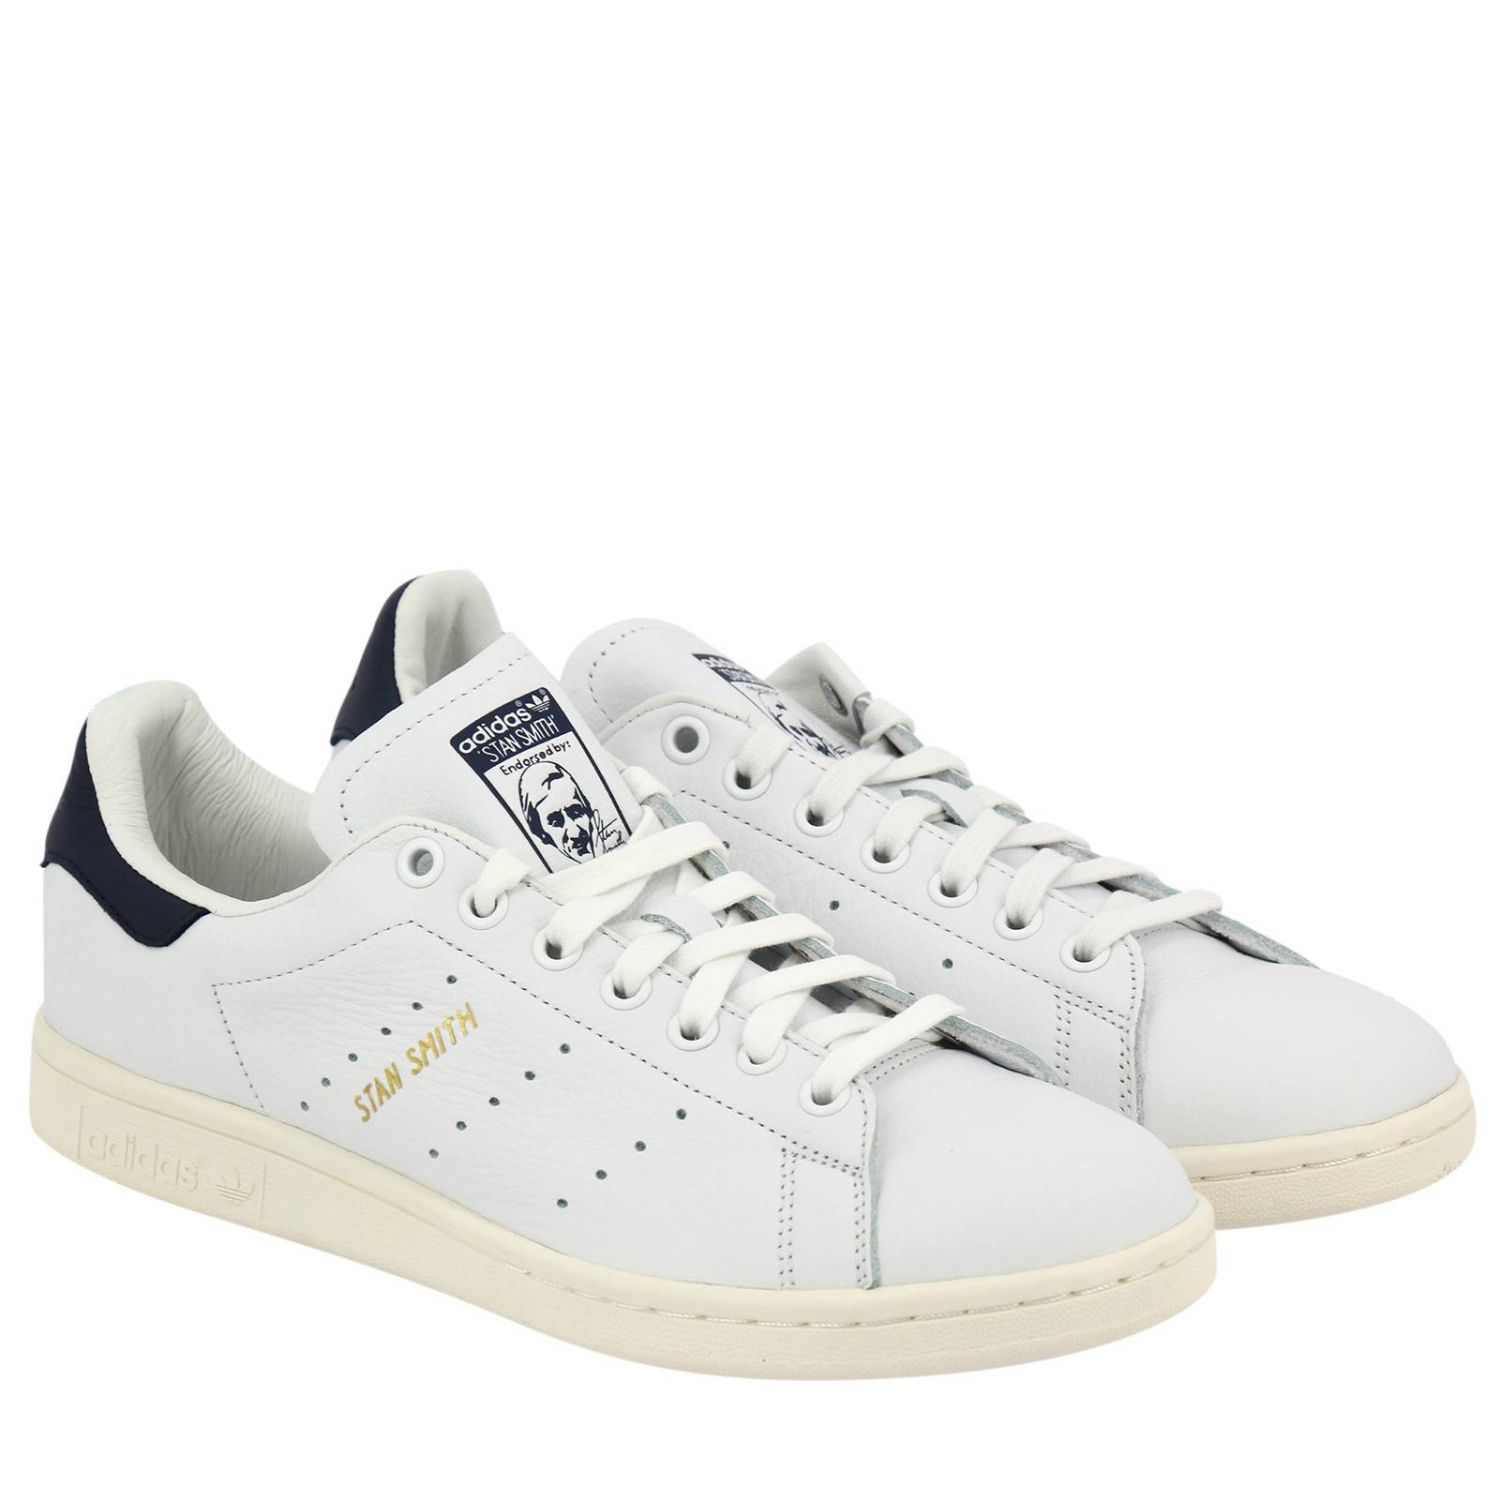 Adidas Originals Stan Smith men's sneakers in textured leather with  ortholite sole | Sneakers Adidas Originals Men White | Sneakers Adidas  Originals CQ2870 Giglio EN